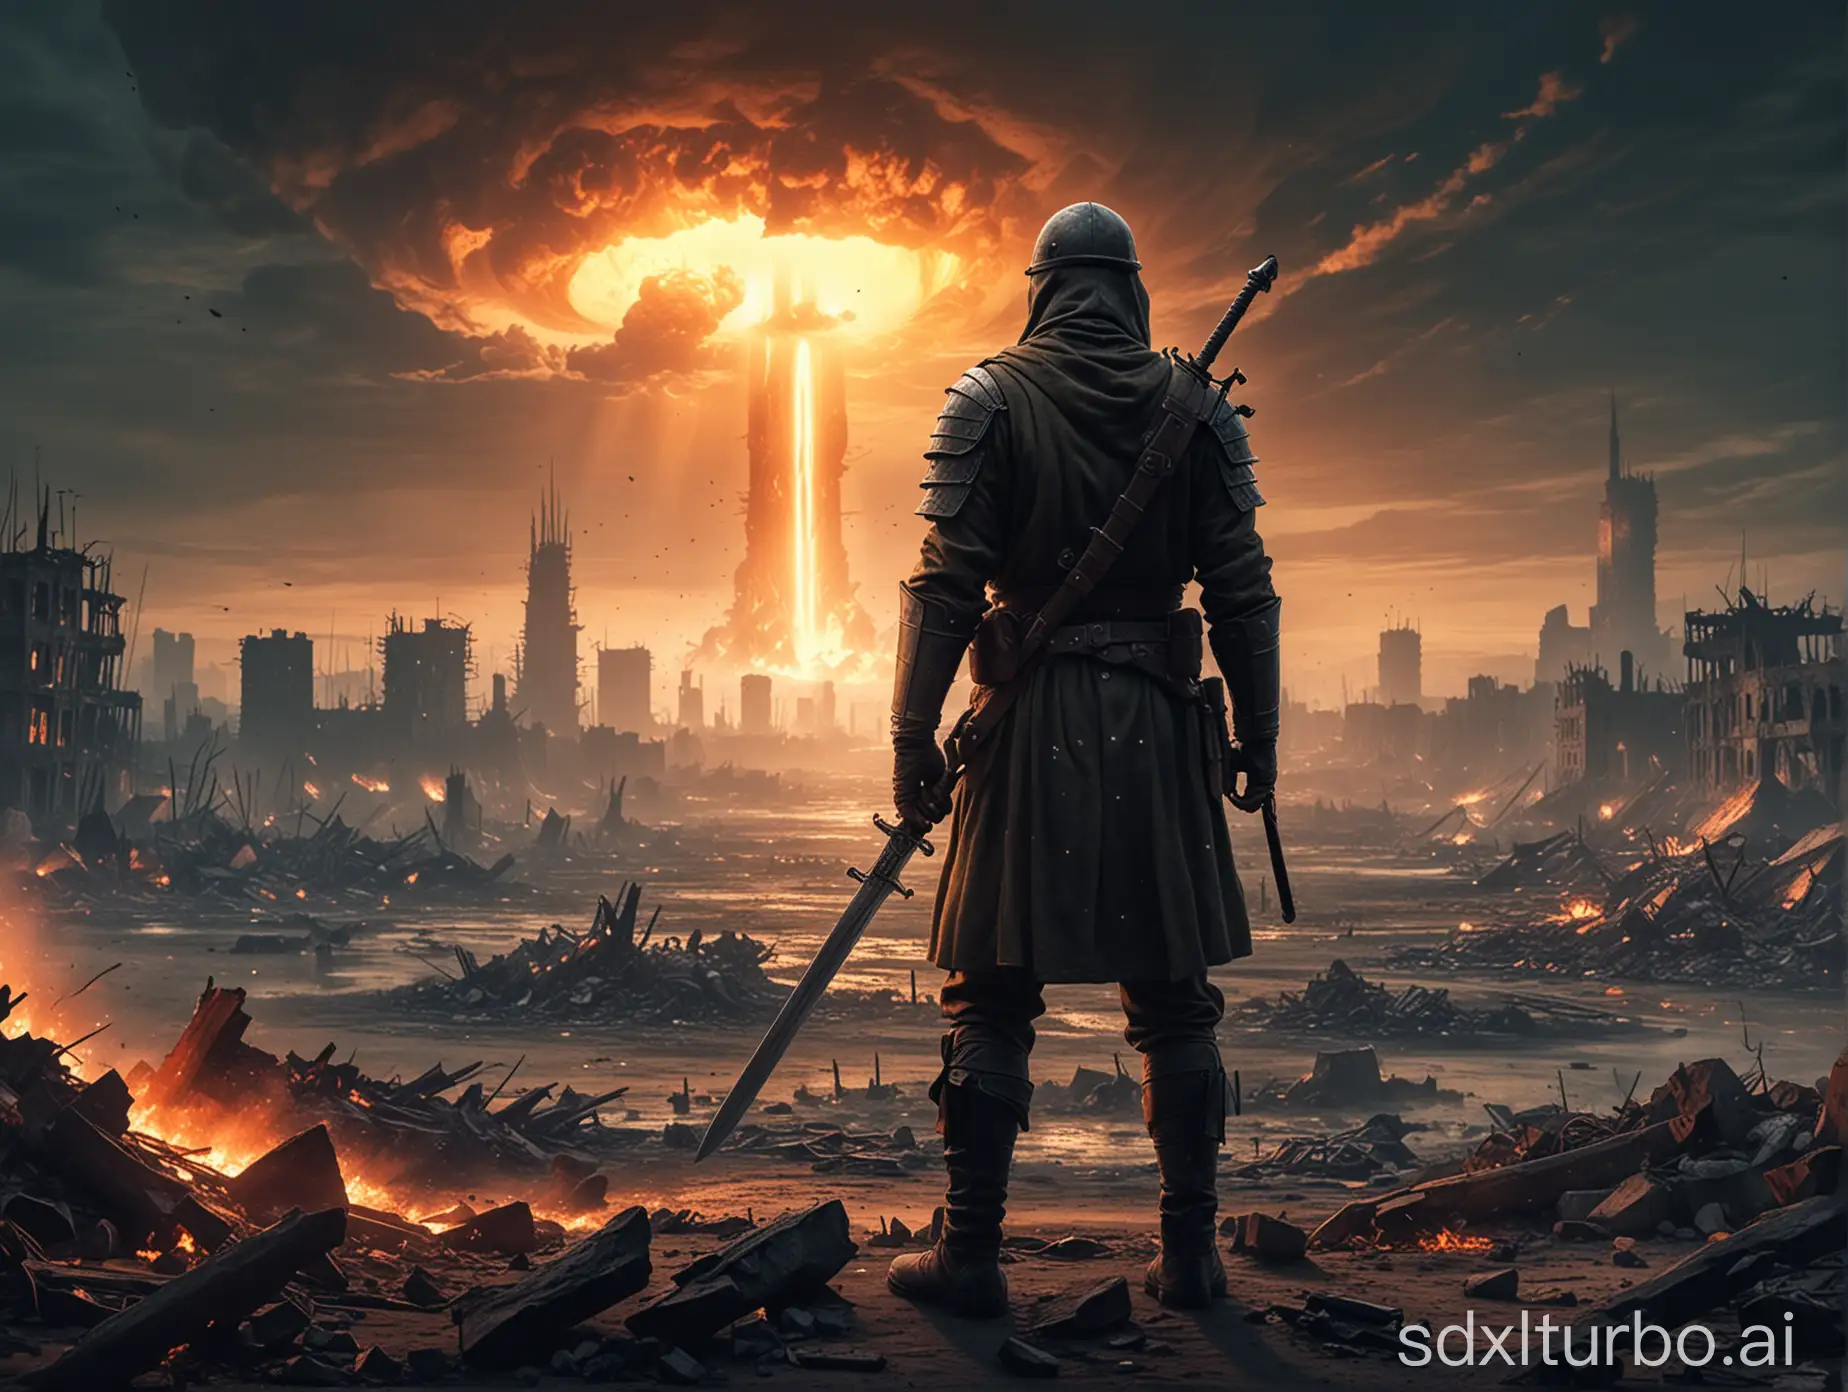 Lone-Medieval-Soldier-Overlooking-Destroyed-Nuclear-Blast-City-at-Dusk